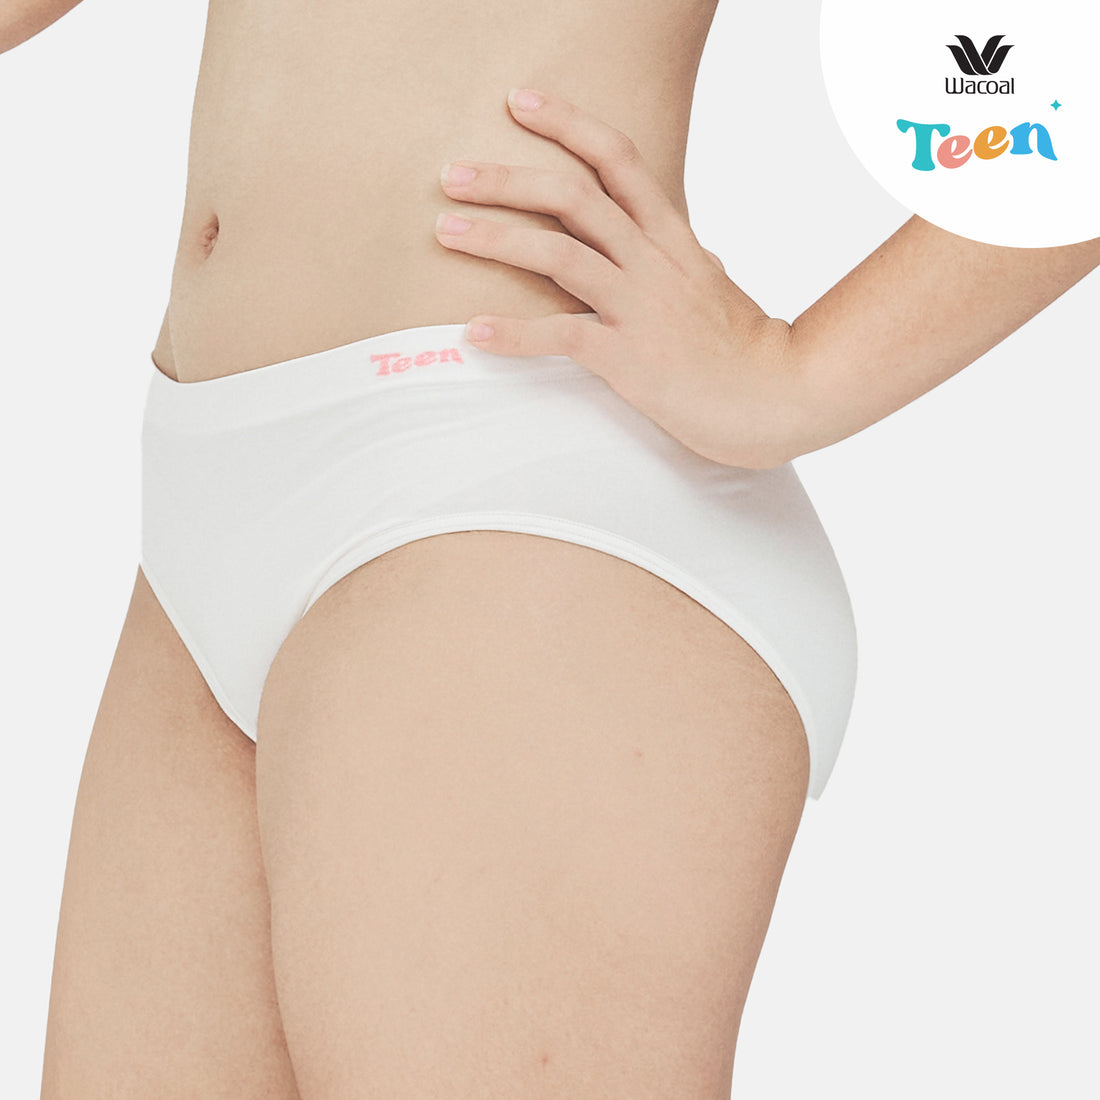 Wacoal Teen underwear for teenagers, wireless bra, strapless style, model WBT109 (paired with MUT108), cream color (CR)